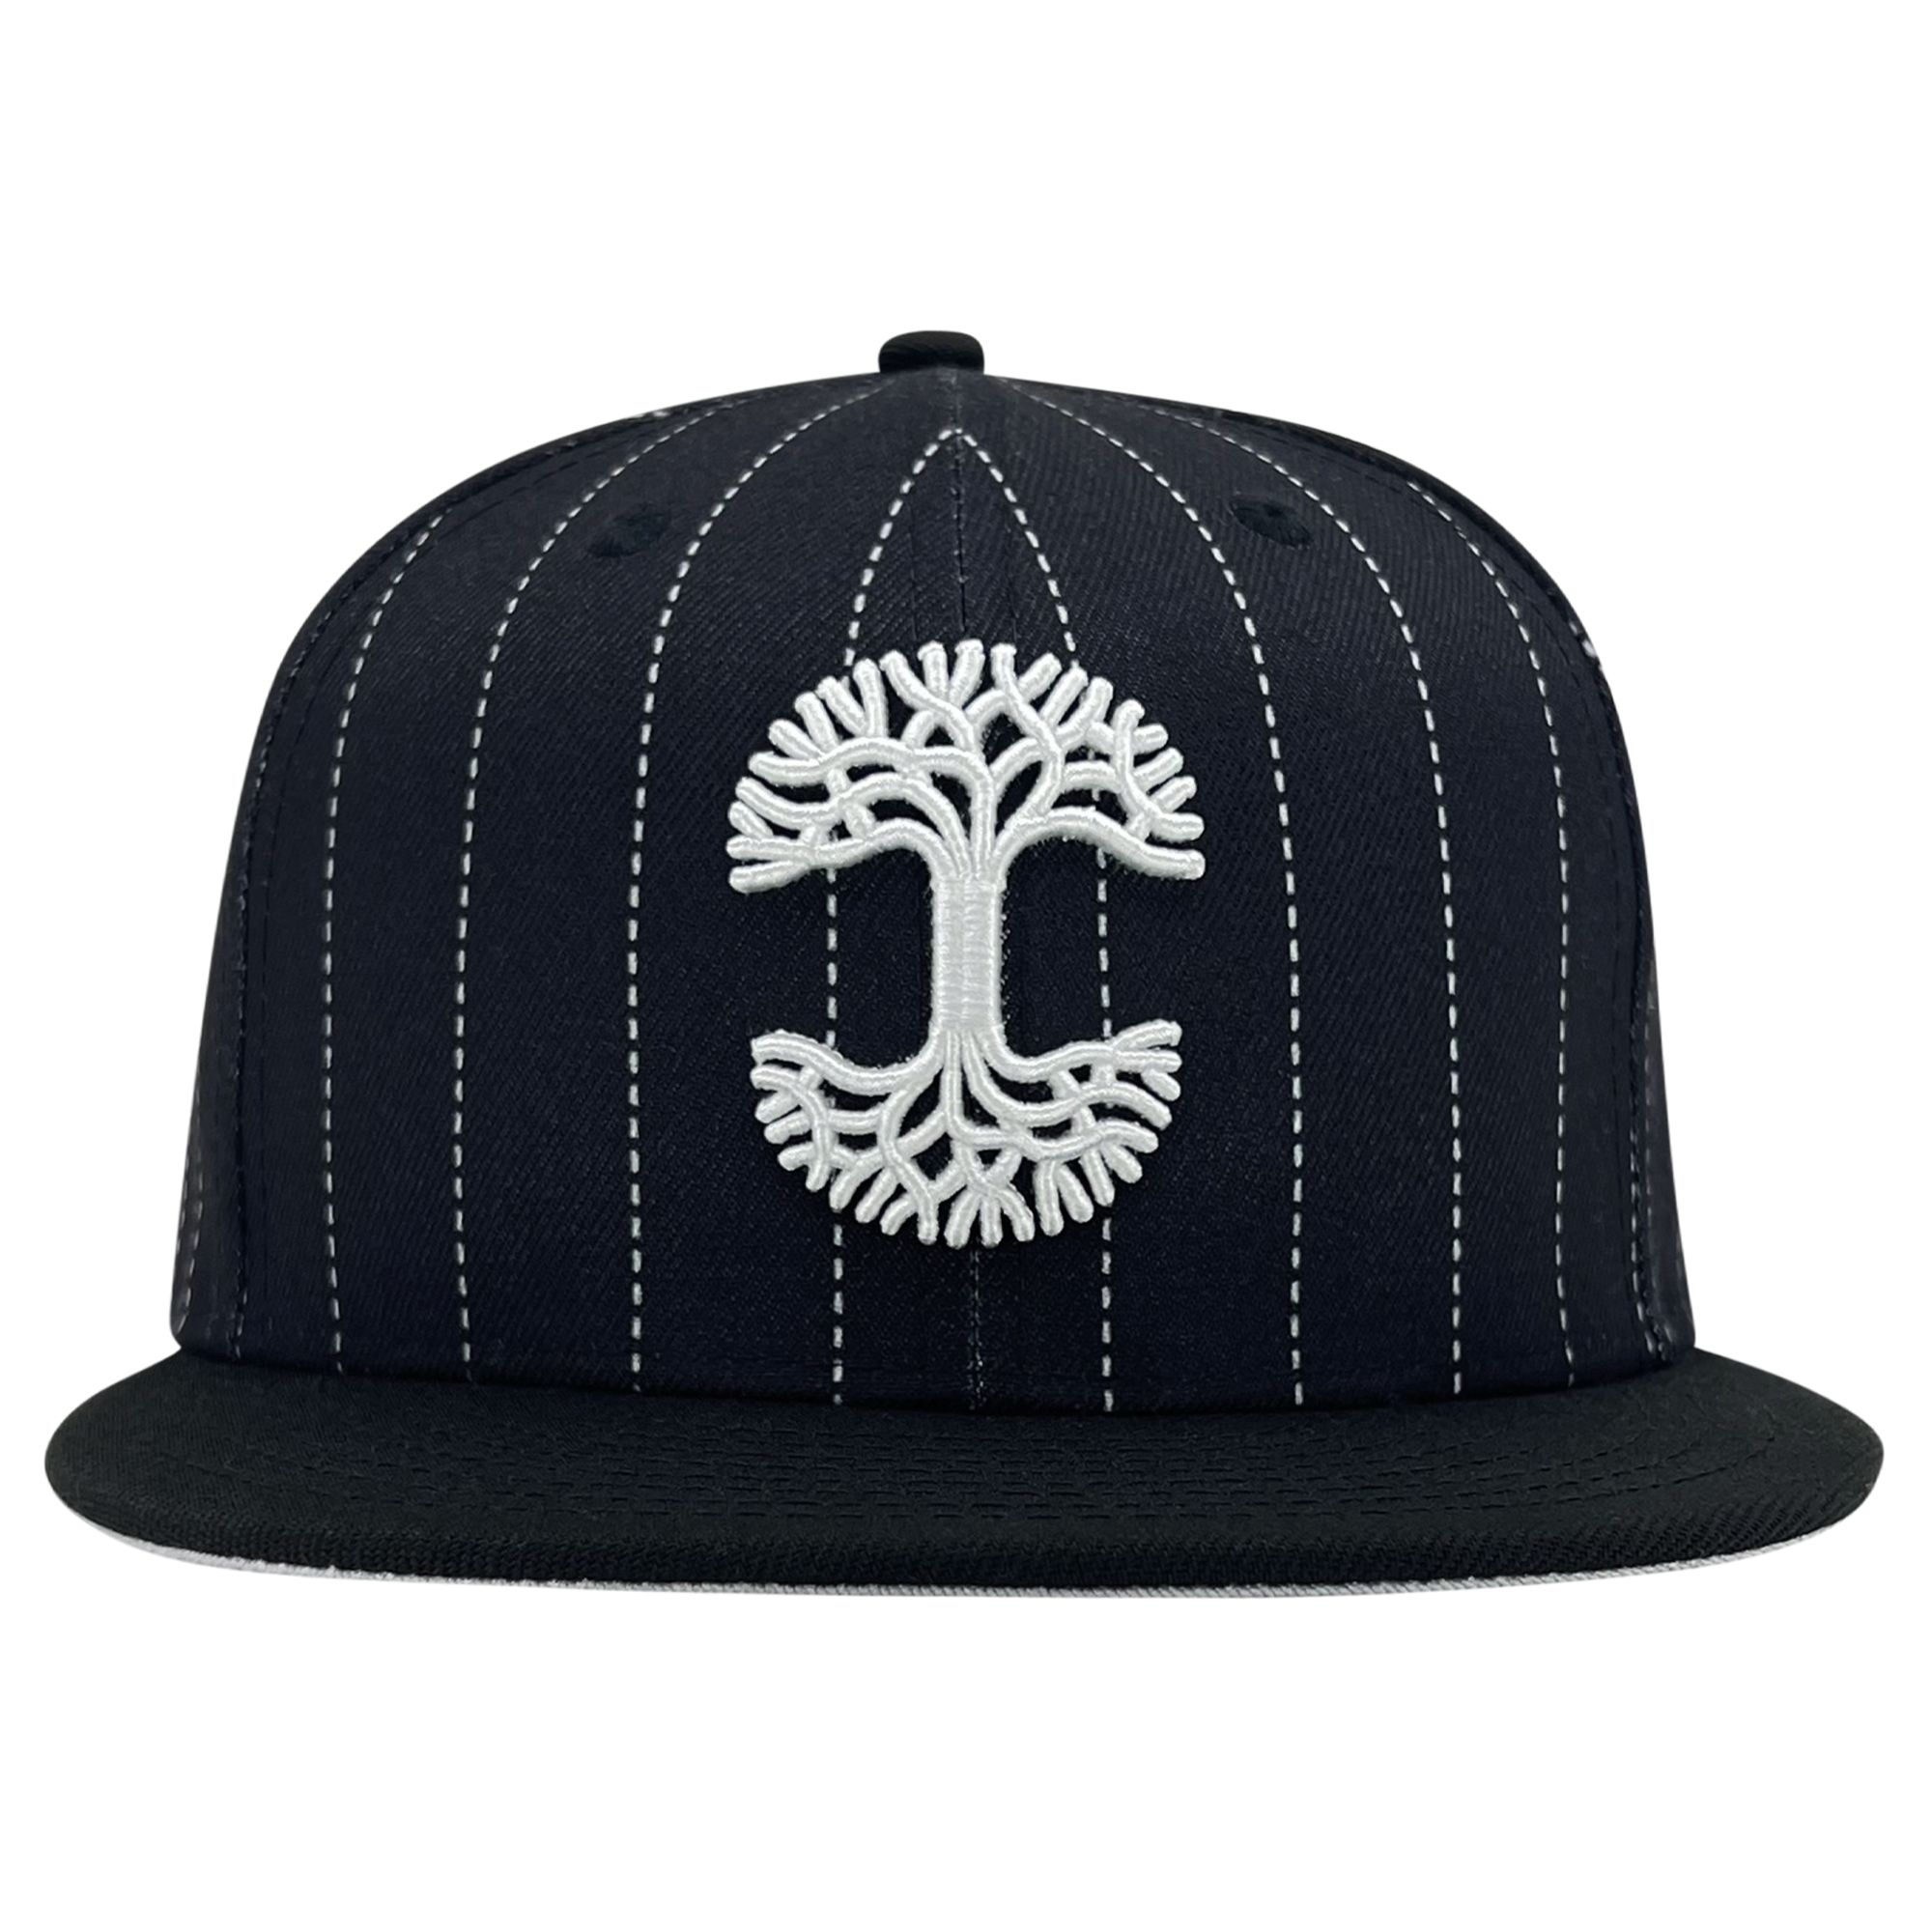 New Era 59FIFTY black pinstripe fitted hat with white embroidered Oaklandish tree logo.